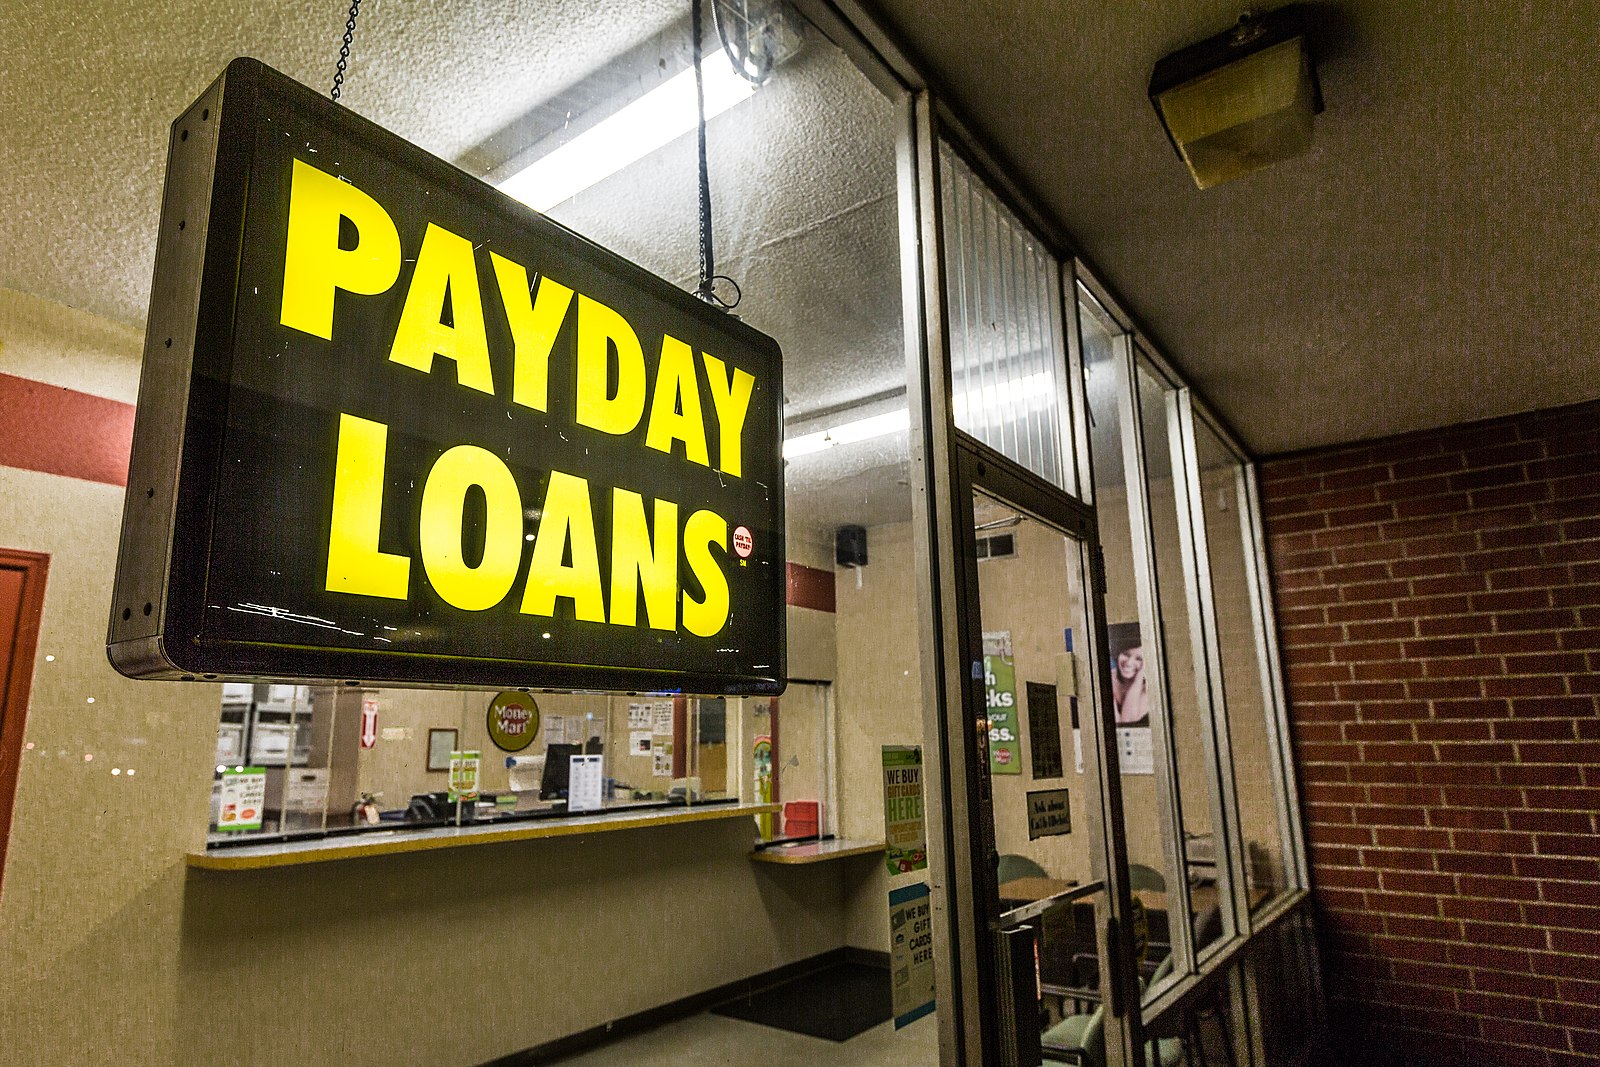 How to Get a Payday Loan?